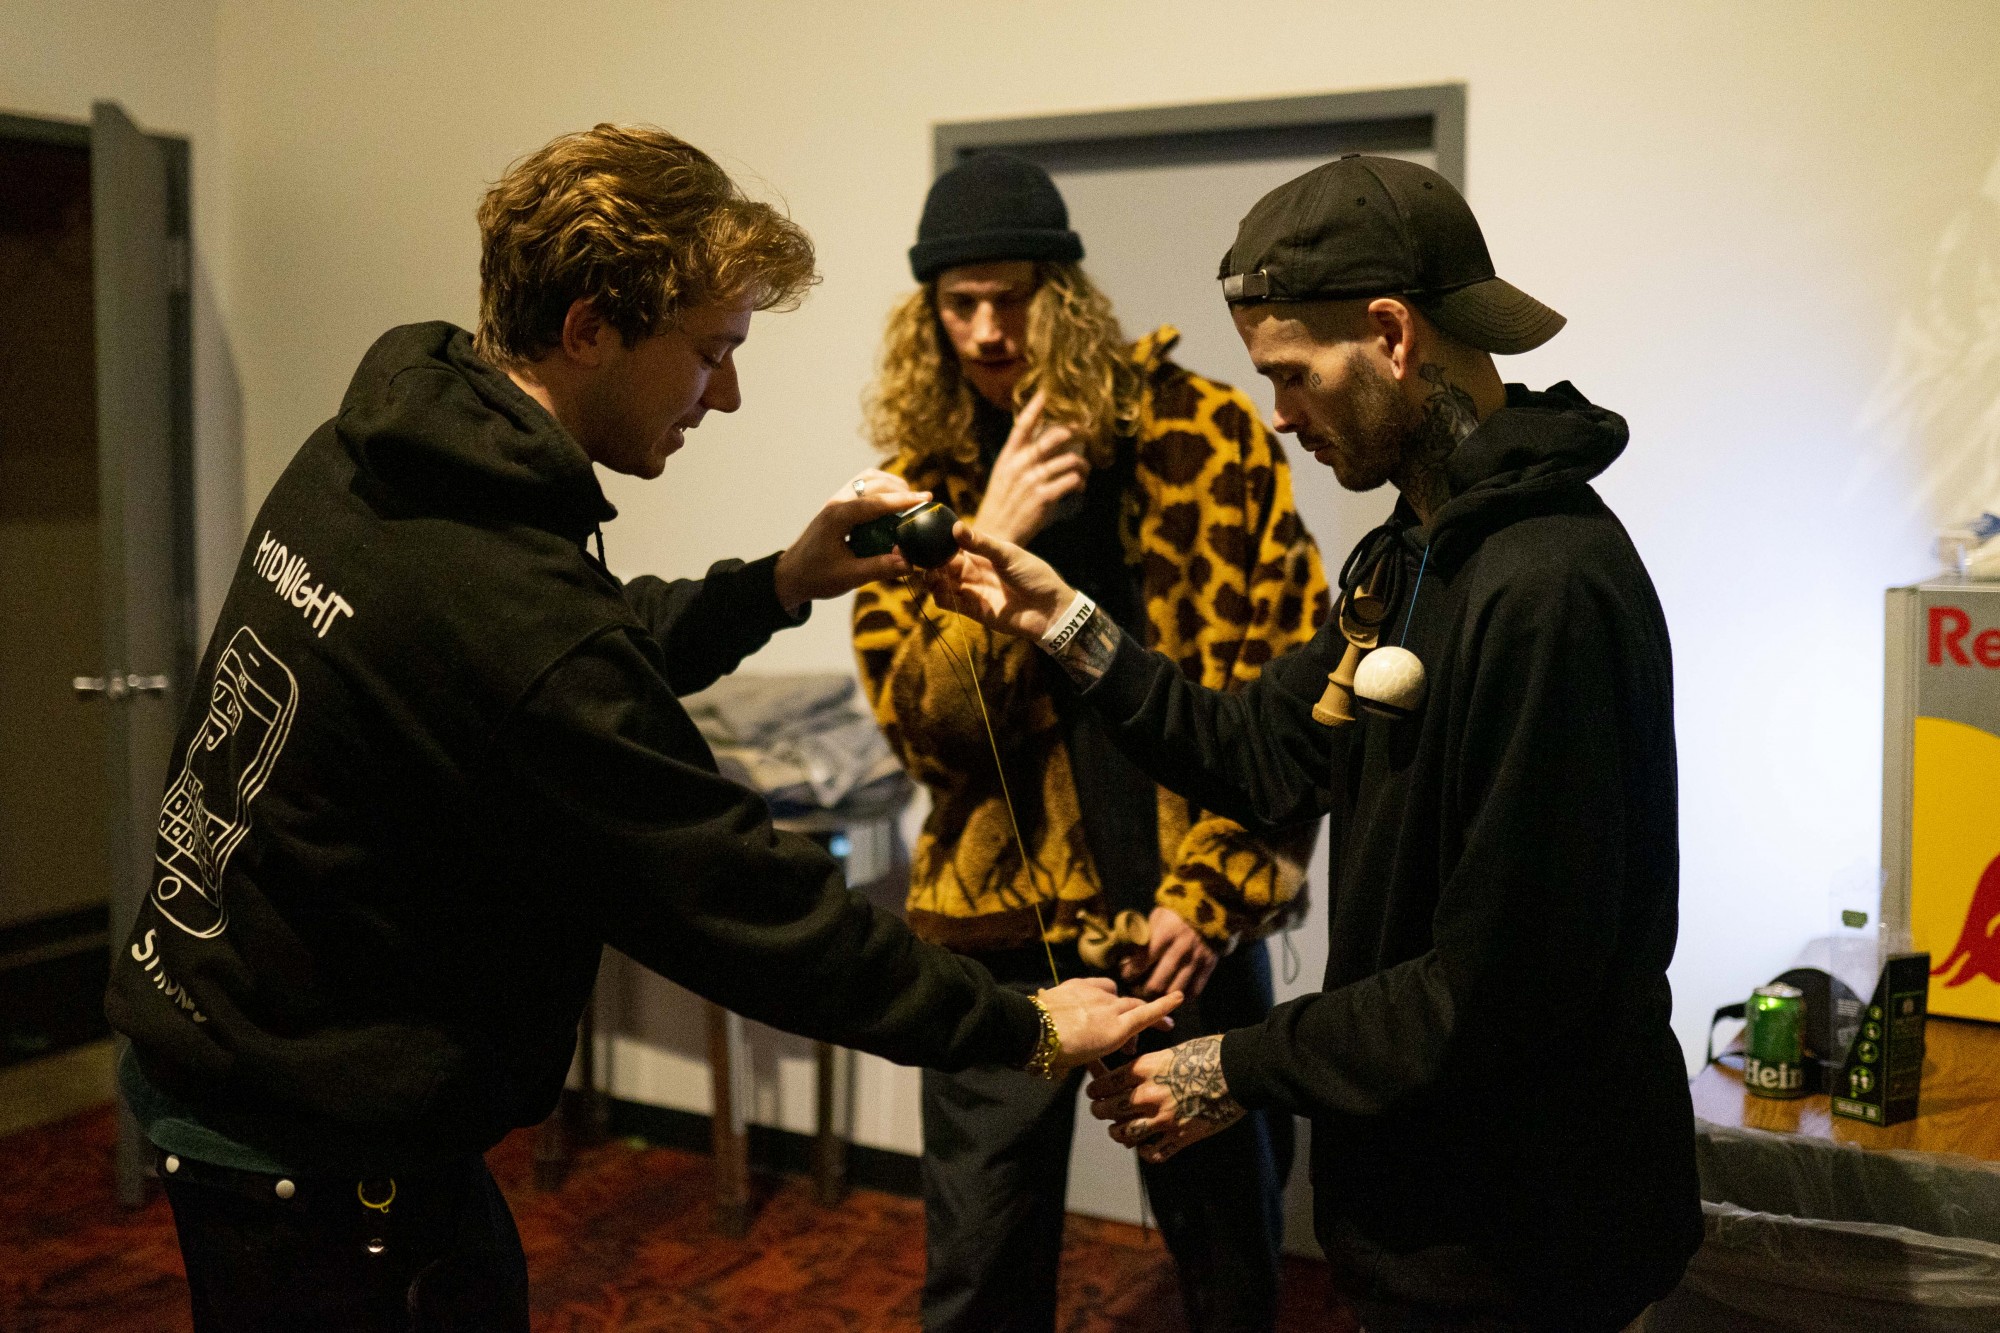 Eddy, left, assists Pat Lundy, right, with the move, “one turn lighthouse,” backstage before Lundy goes on to perform with his band, Modestep, on Wednesday, Nov. 27. Eddy and Reed, center, met Lundy in London in April where they stayed up until 4 a.m. learning new tricks together. 